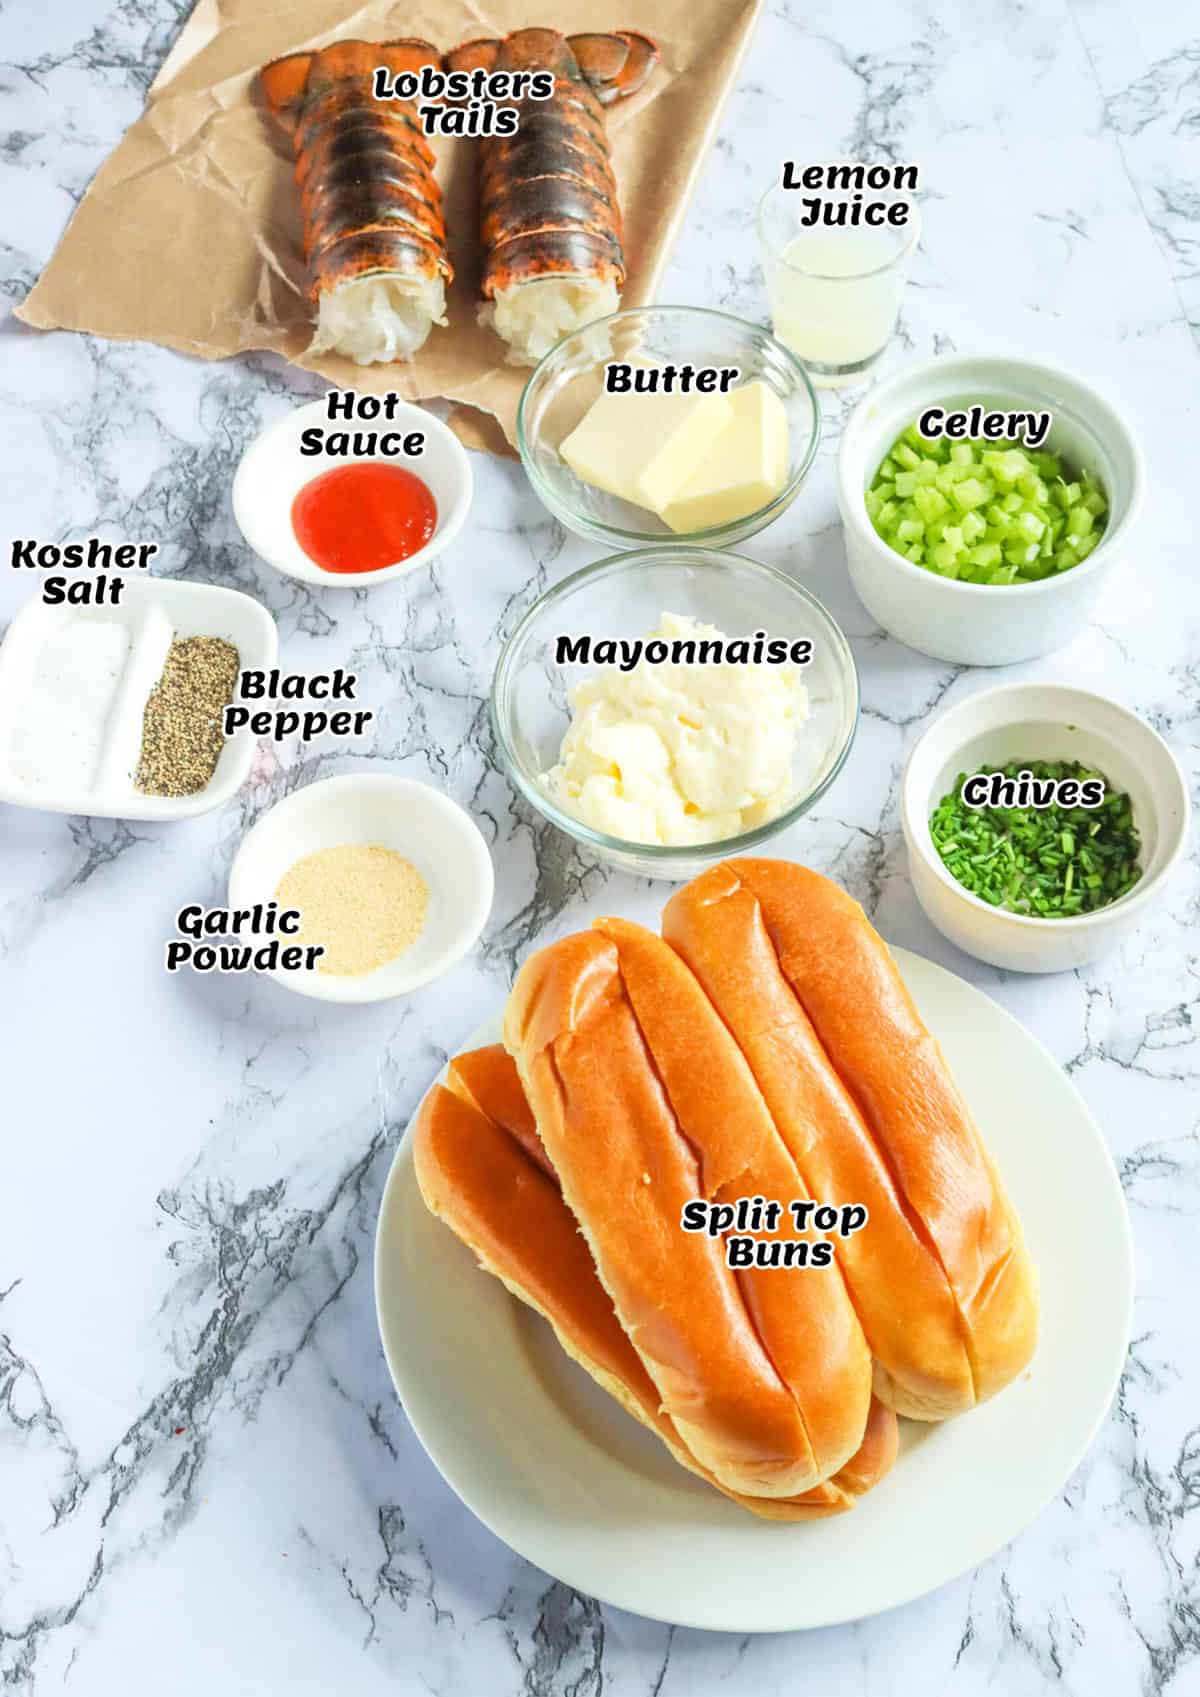 What you need to make a lobster roll